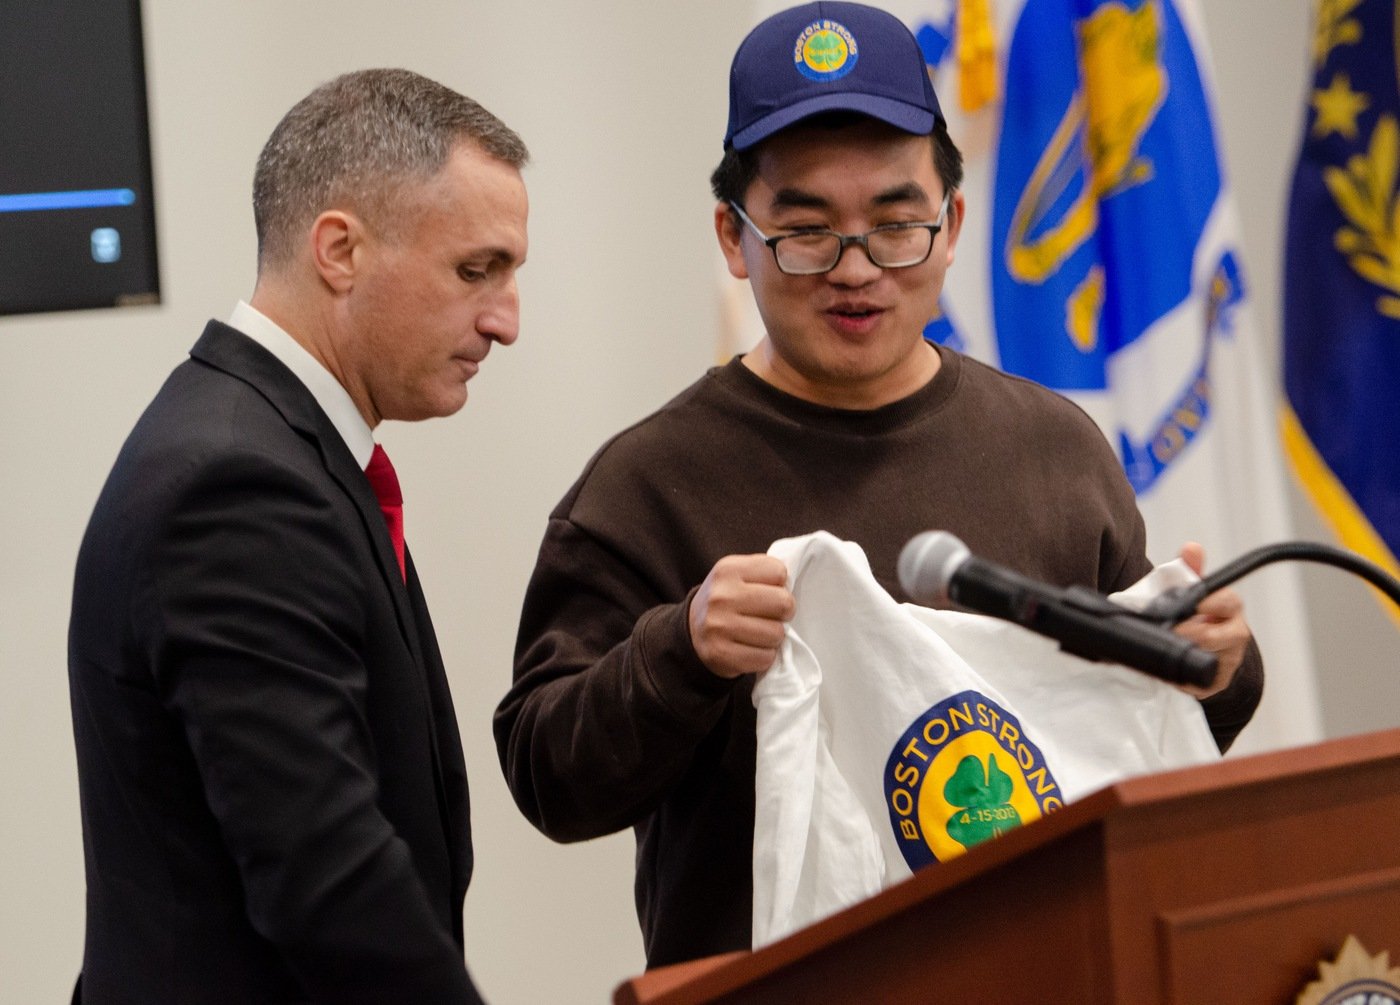 FBI Boston Special Agent in Charge Joseph Bonavolonta presents Dun Meng with items of appreciation during during a remembrance event in March 2023 marking the 10-year anniversary of the Boston Marathon bombings. Meng was kidnapped by the bombers in 2013. 